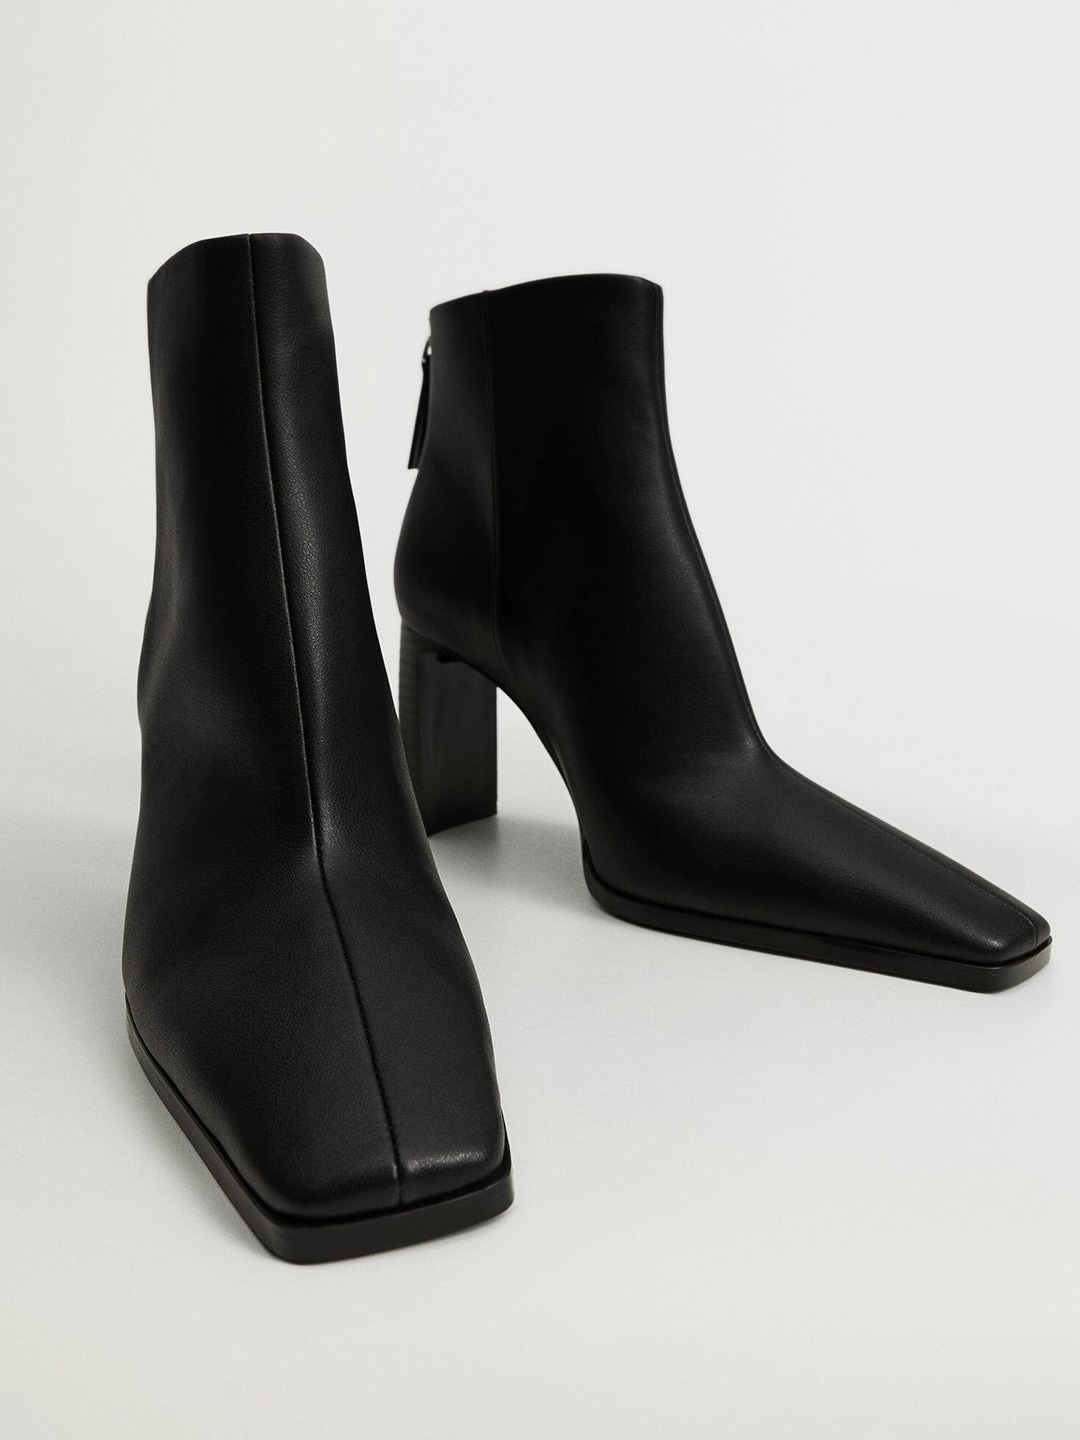 MANGO Women Black Solid Mid Calf Length Boots Price in India